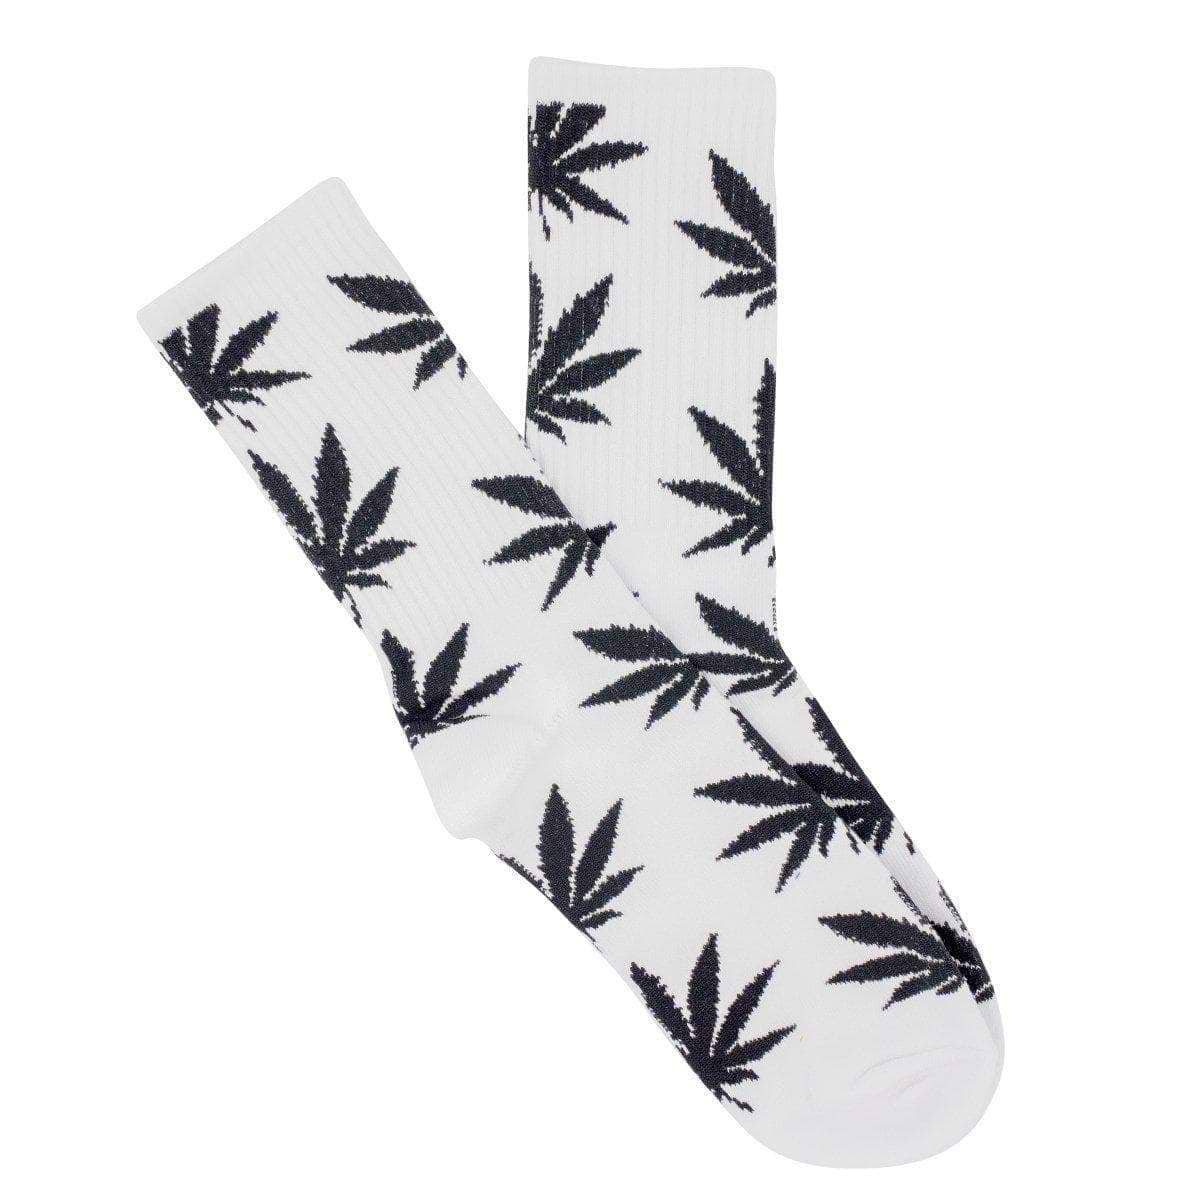 white Stylish two-piece adult socks with a clean look and funky rasta weed leaf design